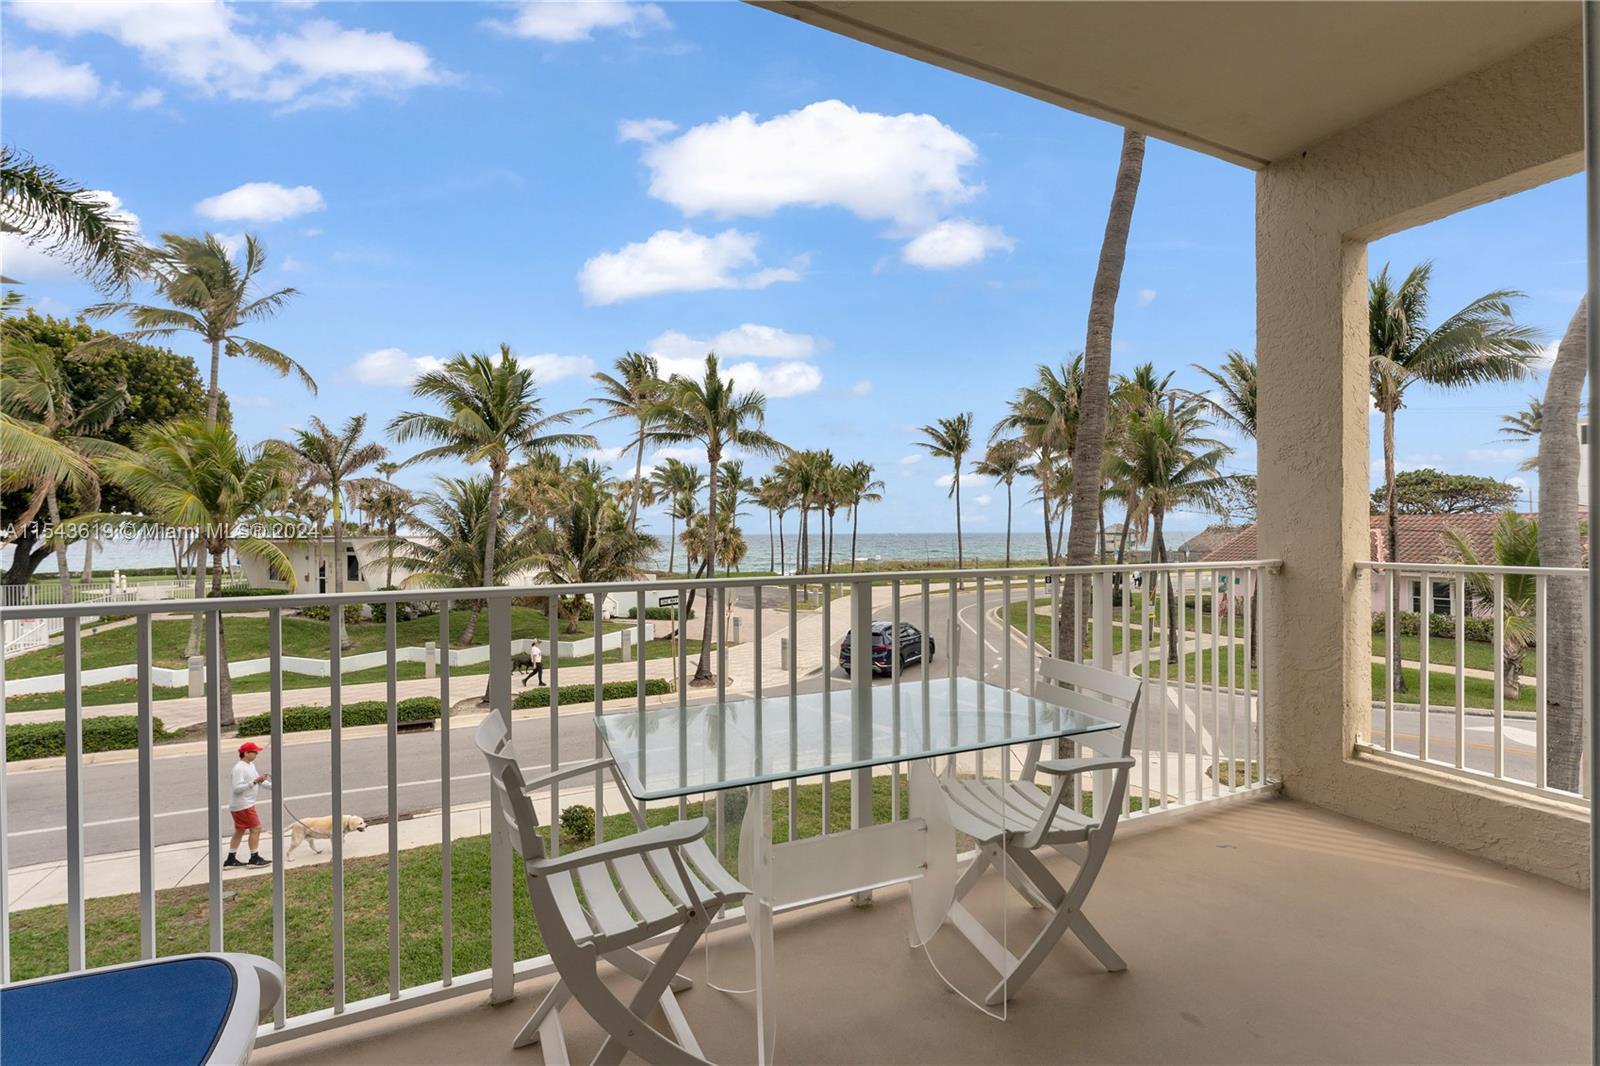 Step Inside with Me! THE BREATHTAKING OCEAN VIEW IS PRICELESS from the spacious balcony. Enjoy your 